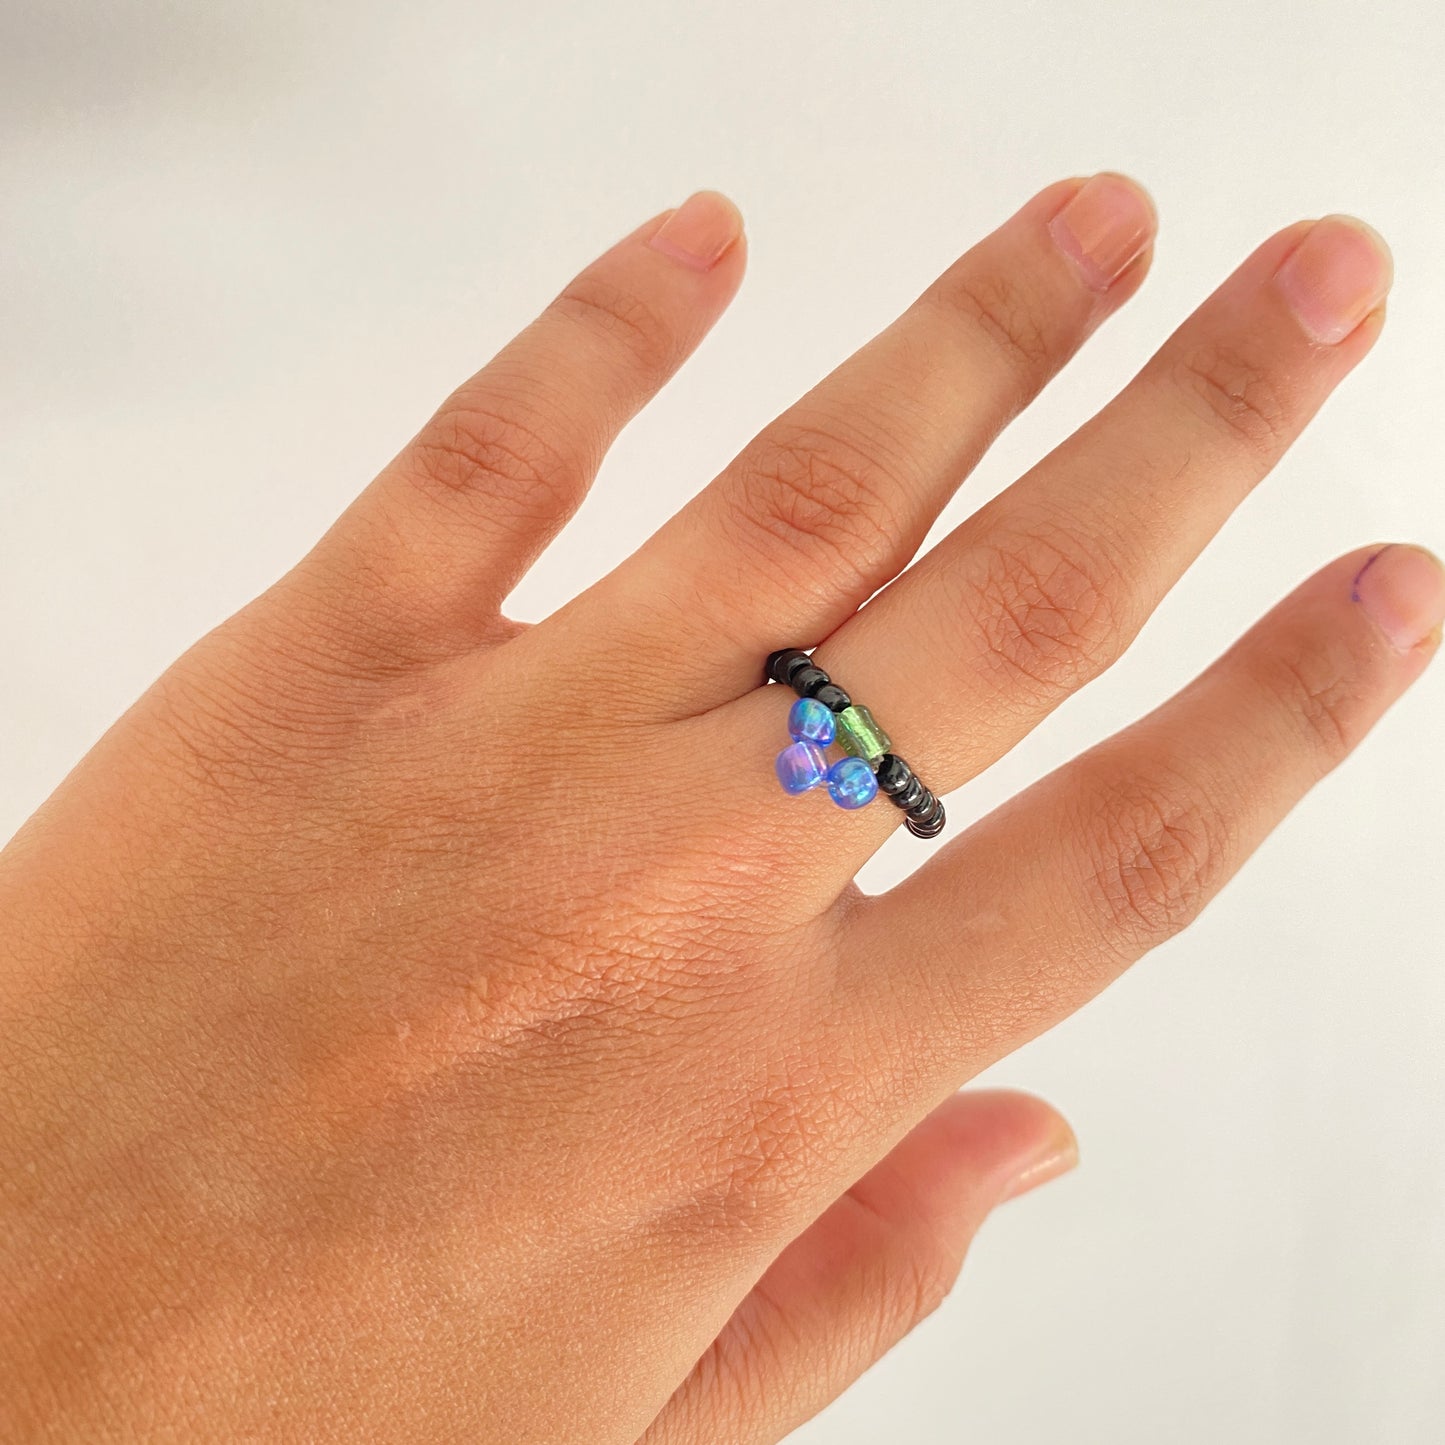 BLUE BERRY RING